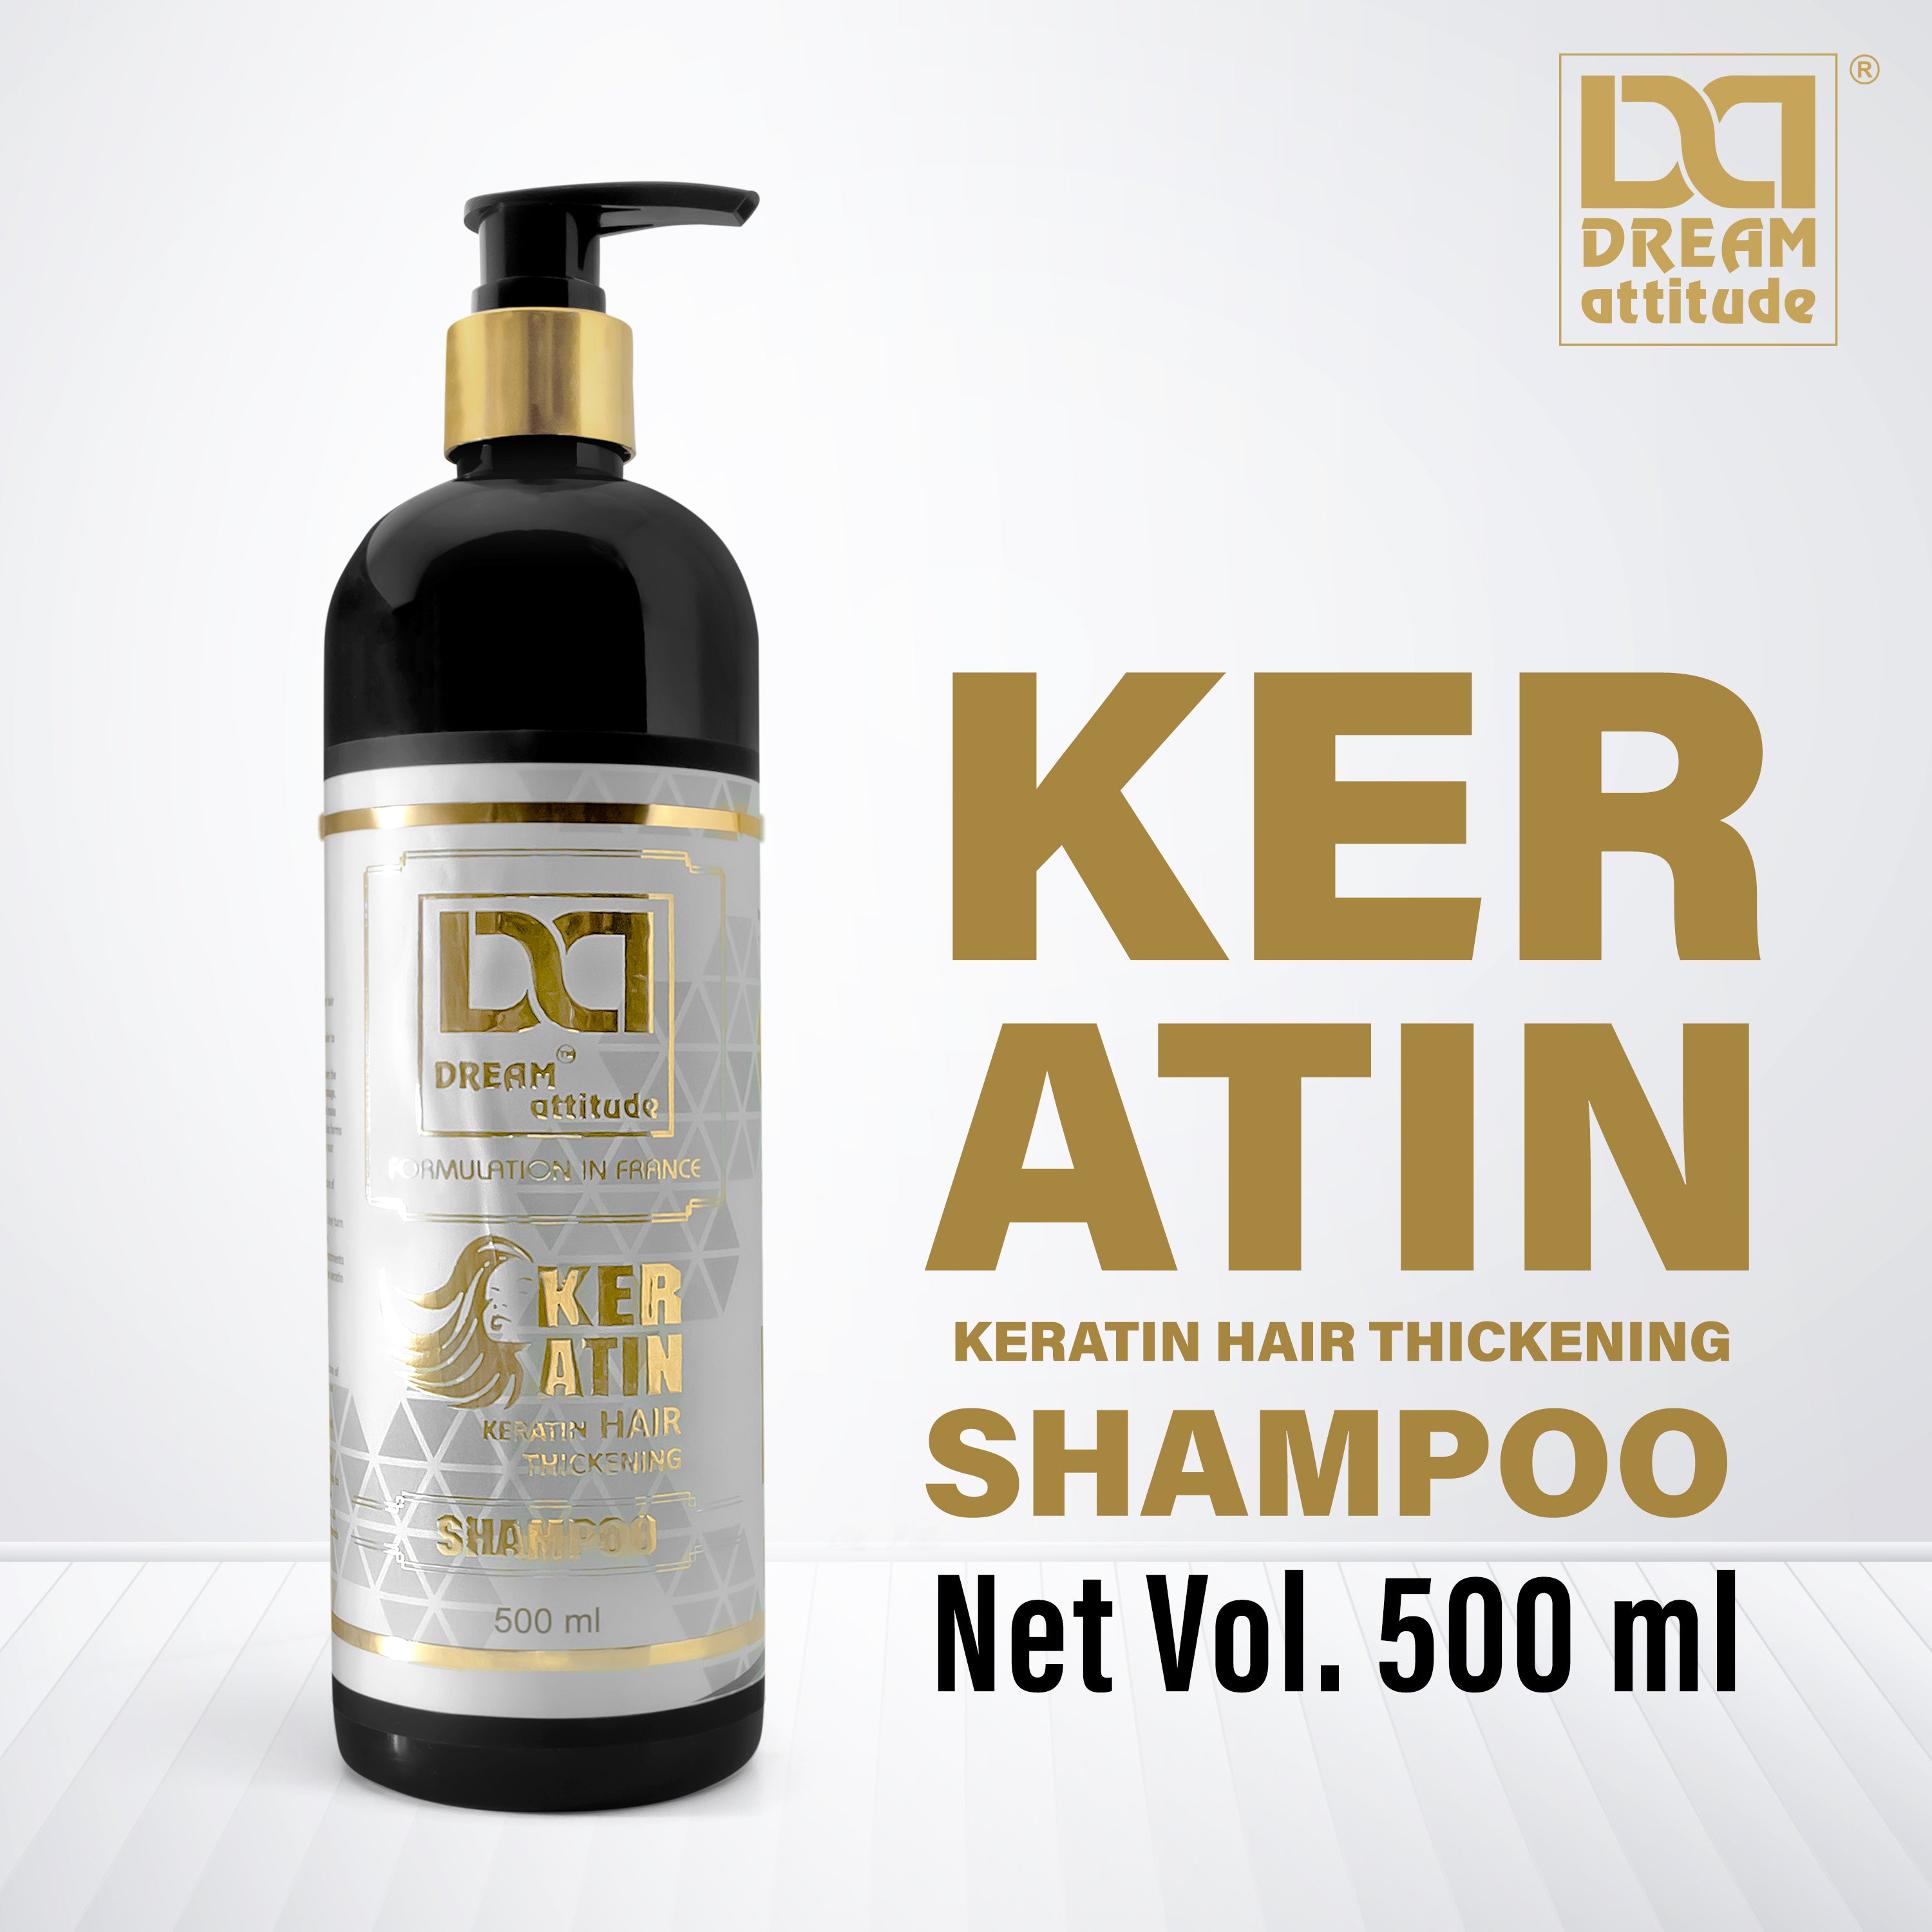 Dream Attitude Keratin Hair Thickening Shampoo - Transform Your Hair with Volume and Strength[500ml]